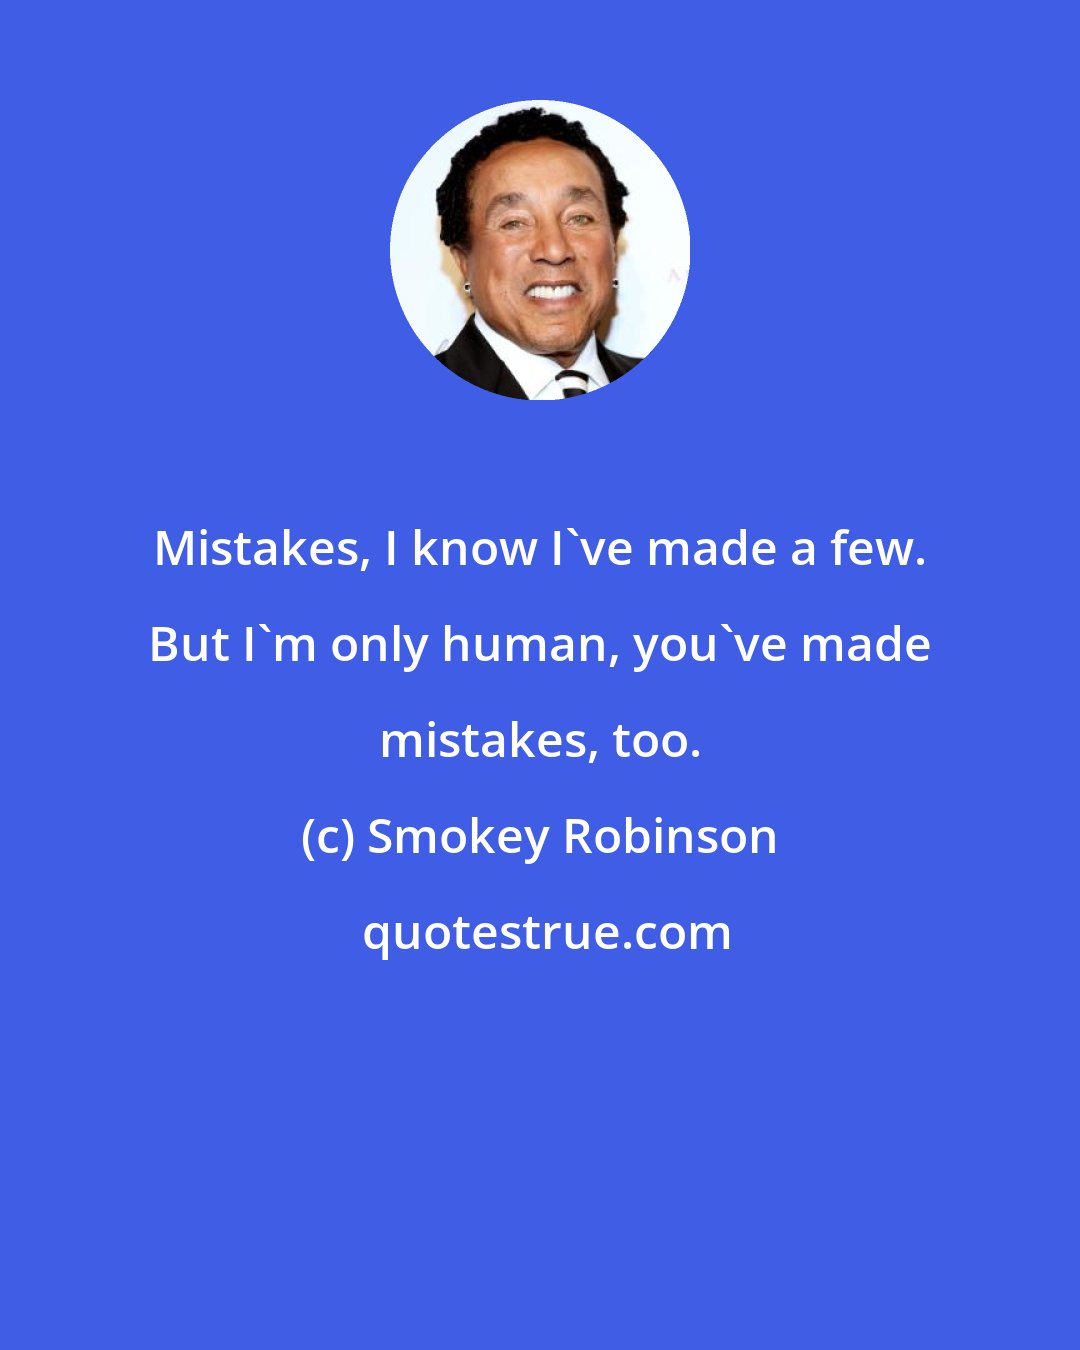 Smokey Robinson: Mistakes, I know I've made a few. But I'm only human, you've made mistakes, too.